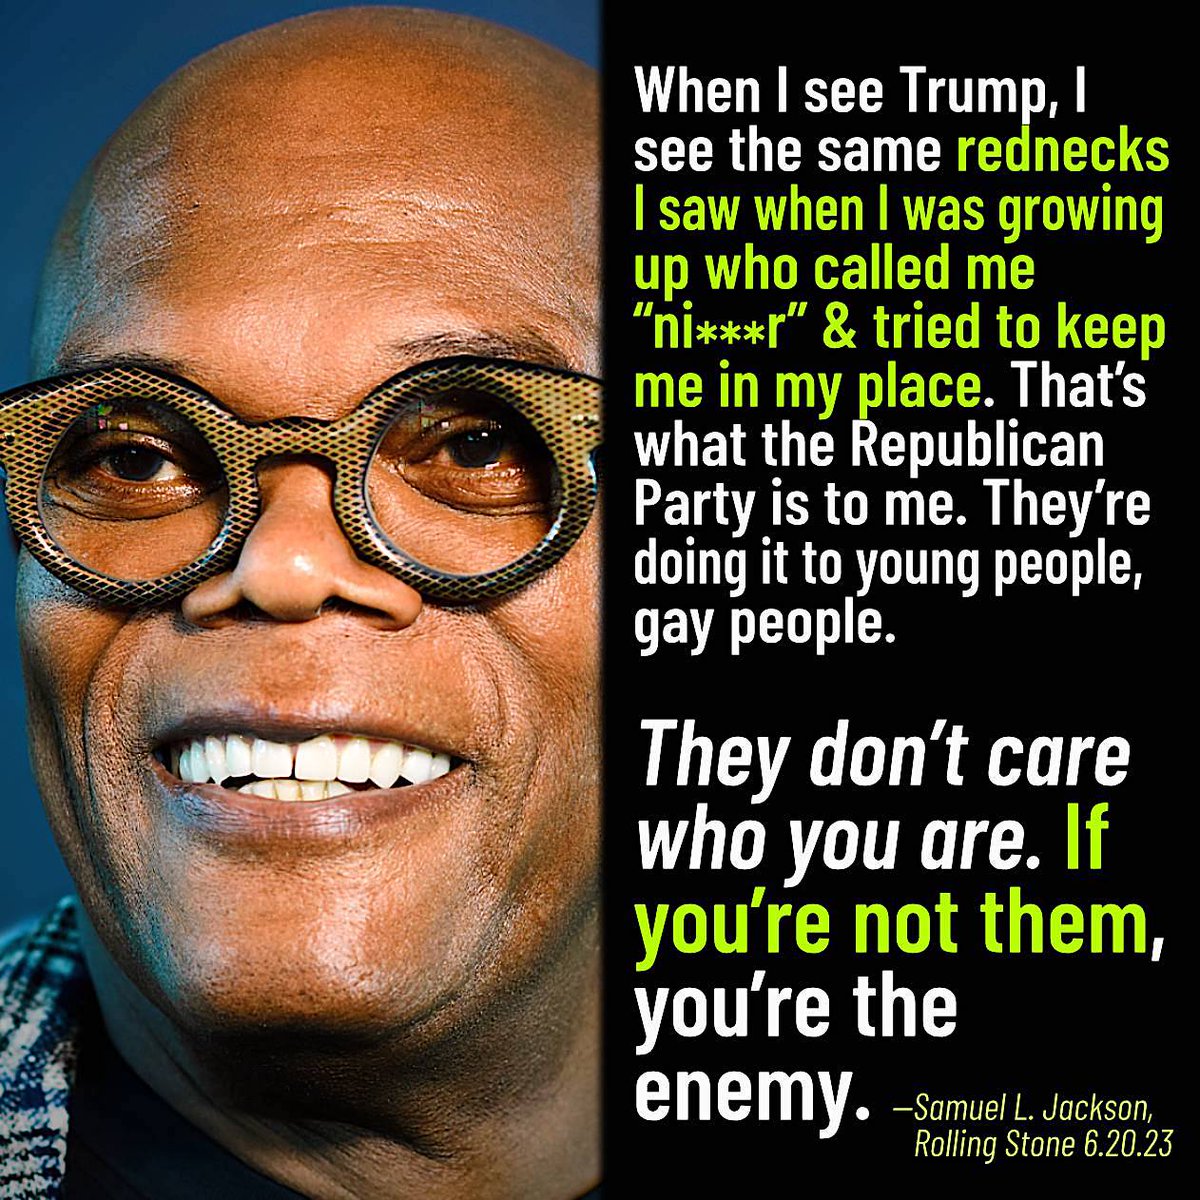 🟥🟥🟥 Do you agree with what Samuel L. Jackson thinks of Republicans?🤔